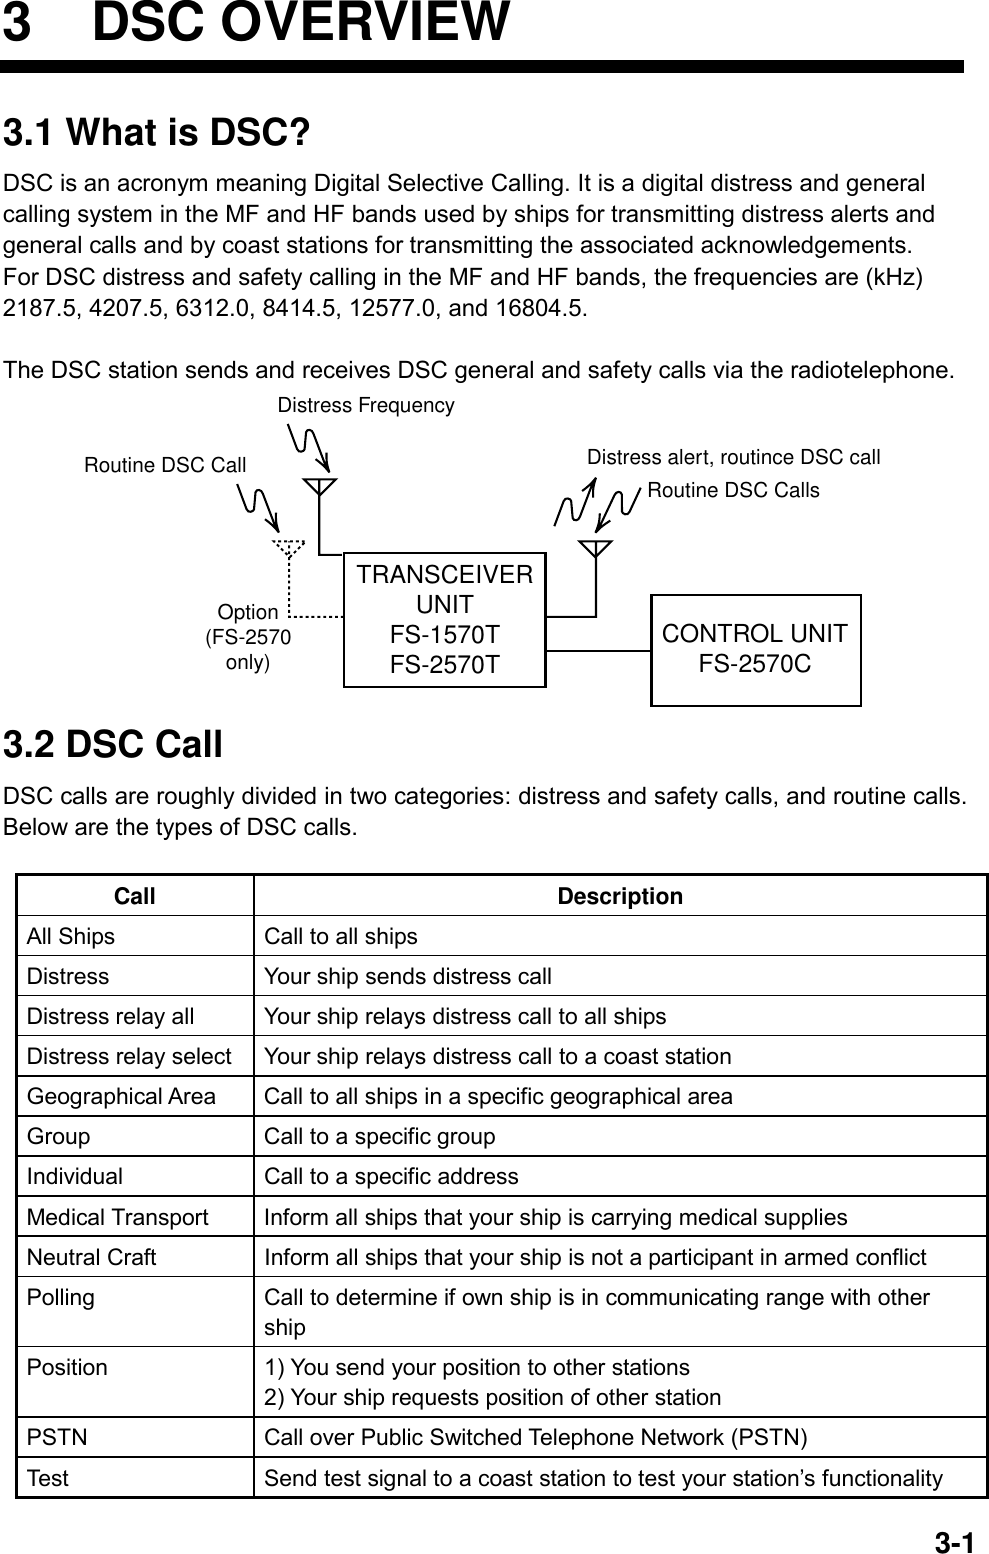   3-13 DSC OVERVIEW 3.1 What is DSC? DSC is an acronym meaning Digital Selective Calling. It is a digital distress and general calling system in the MF and HF bands used by ships for transmitting distress alerts and general calls and by coast stations for transmitting the associated acknowledgements. For DSC distress and safety calling in the MF and HF bands, the frequencies are (kHz) 2187.5, 4207.5, 6312.0, 8414.5, 12577.0, and 16804.5.  The DSC station sends and receives DSC general and safety calls via the radiotelephone. TRANSCEIVERUNITFS-1570TFS-2570TDistress FrequencyRoutine DSC Call Routine DSC CallsOption(FS-2570only)CONTROL UNITFS-2570CDistress alert, routince DSC call 3.2 DSC Call DSC calls are roughly divided in two categories: distress and safety calls, and routine calls. Below are the types of DSC calls.  Call Description All Ships  Call to all ships Distress    Your ship sends distress call Distress relay all    Your ship relays distress call to all ships Distress relay select    Your ship relays distress call to a coast station Geographical Area    Call to all ships in a specific geographical area Group    Call to a specific group Individual    Call to a specific address Medical Transport    Inform all ships that your ship is carrying medical supplies Neutral Craft  Inform all ships that your ship is not a participant in armed conflict Polling    Call to determine if own ship is in communicating range with other ship Position  1) You send your position to other stations 2) Your ship requests position of other station PSTN  Call over Public Switched Telephone Network (PSTN) Test  Send test signal to a coast station to test your station’s functionality 